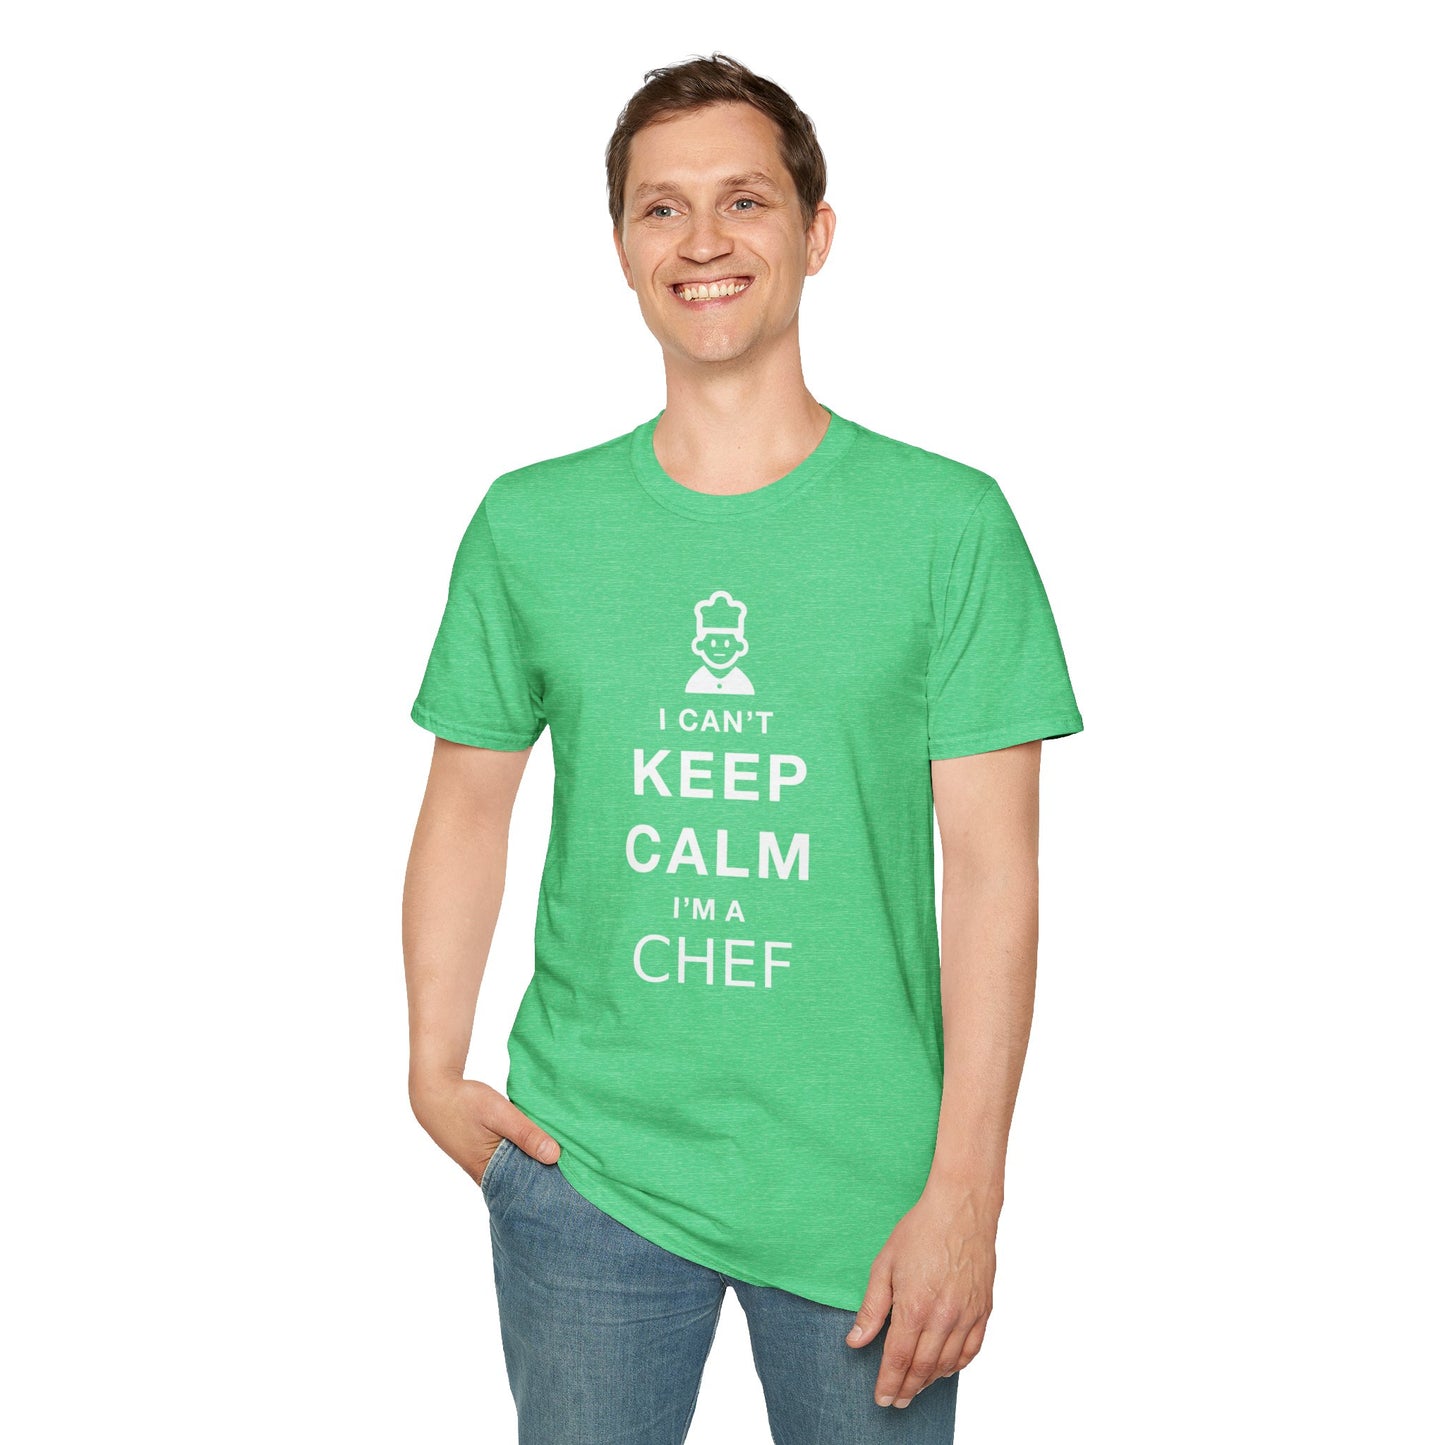 Unleash Your Culinary Passion with Our 'I Can't Keep Calm, I Am a Chef' T-Shirt